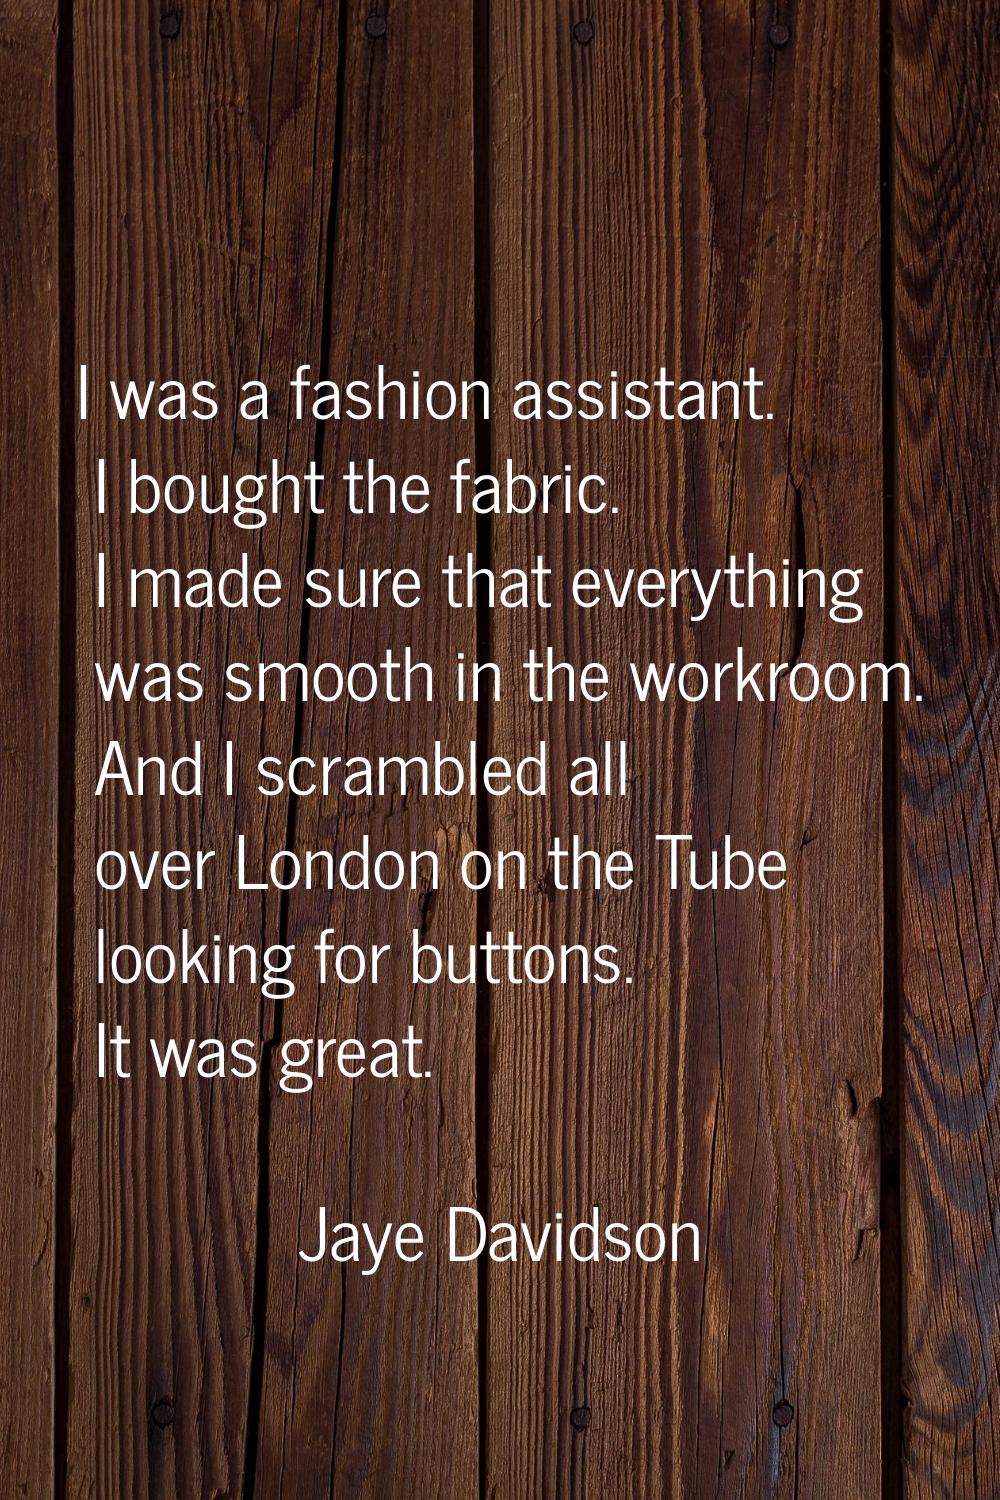 I was a fashion assistant. I bought the fabric. I made sure that everything was smooth in the workr